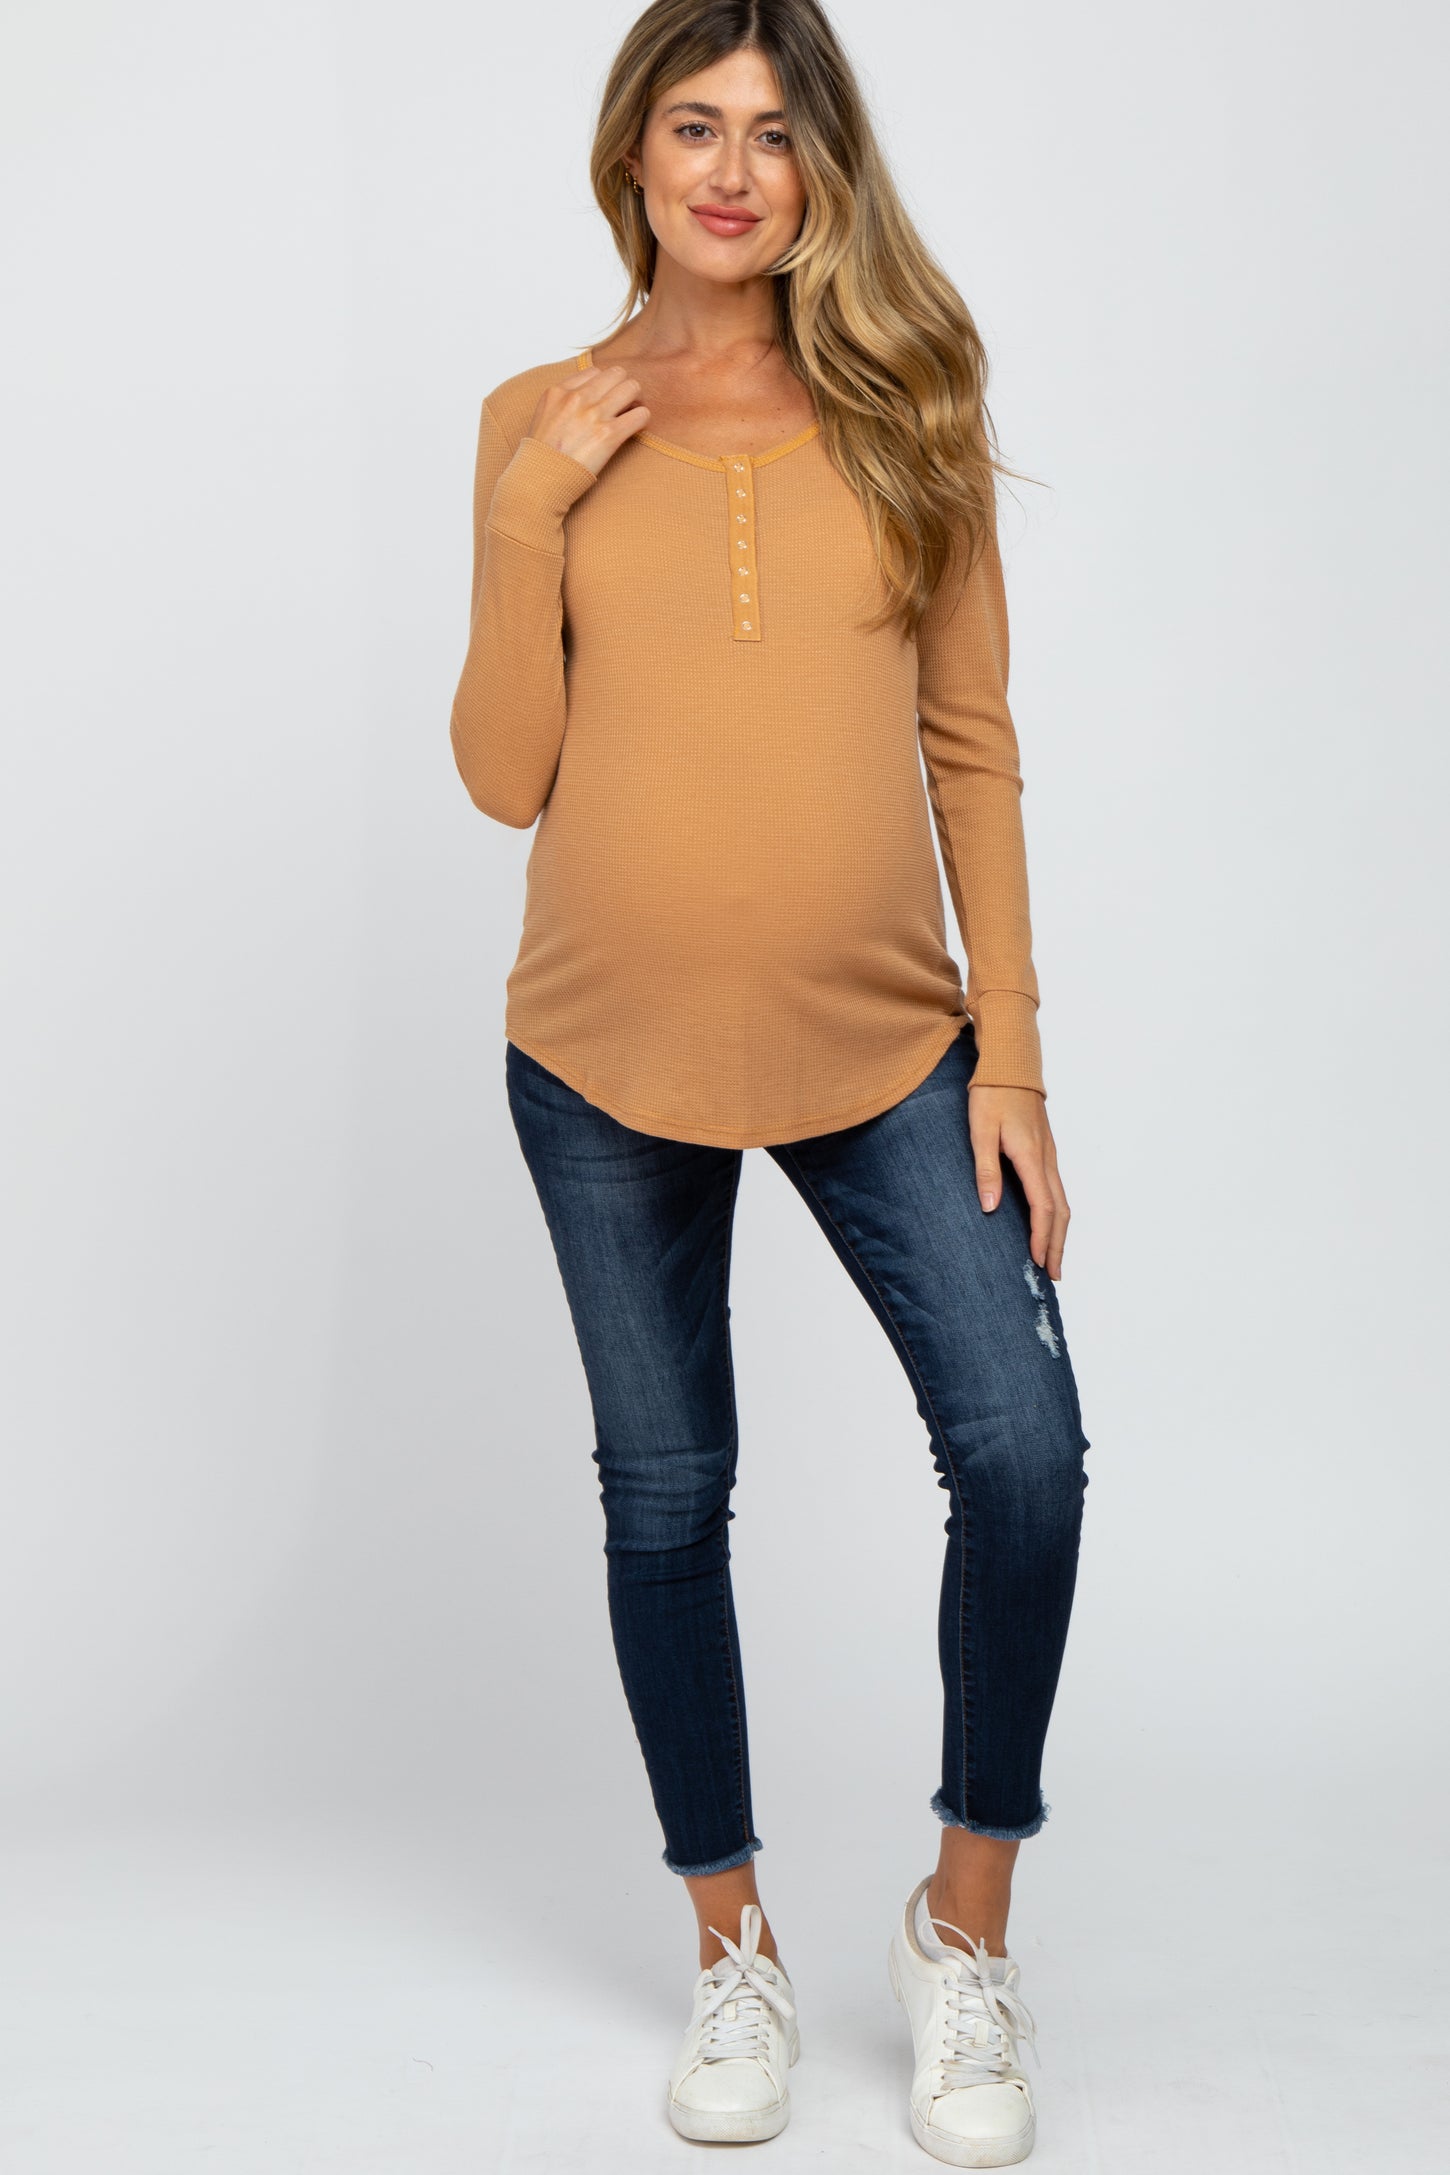 Gold Waffle Knit Front Snap Button Maternity Top